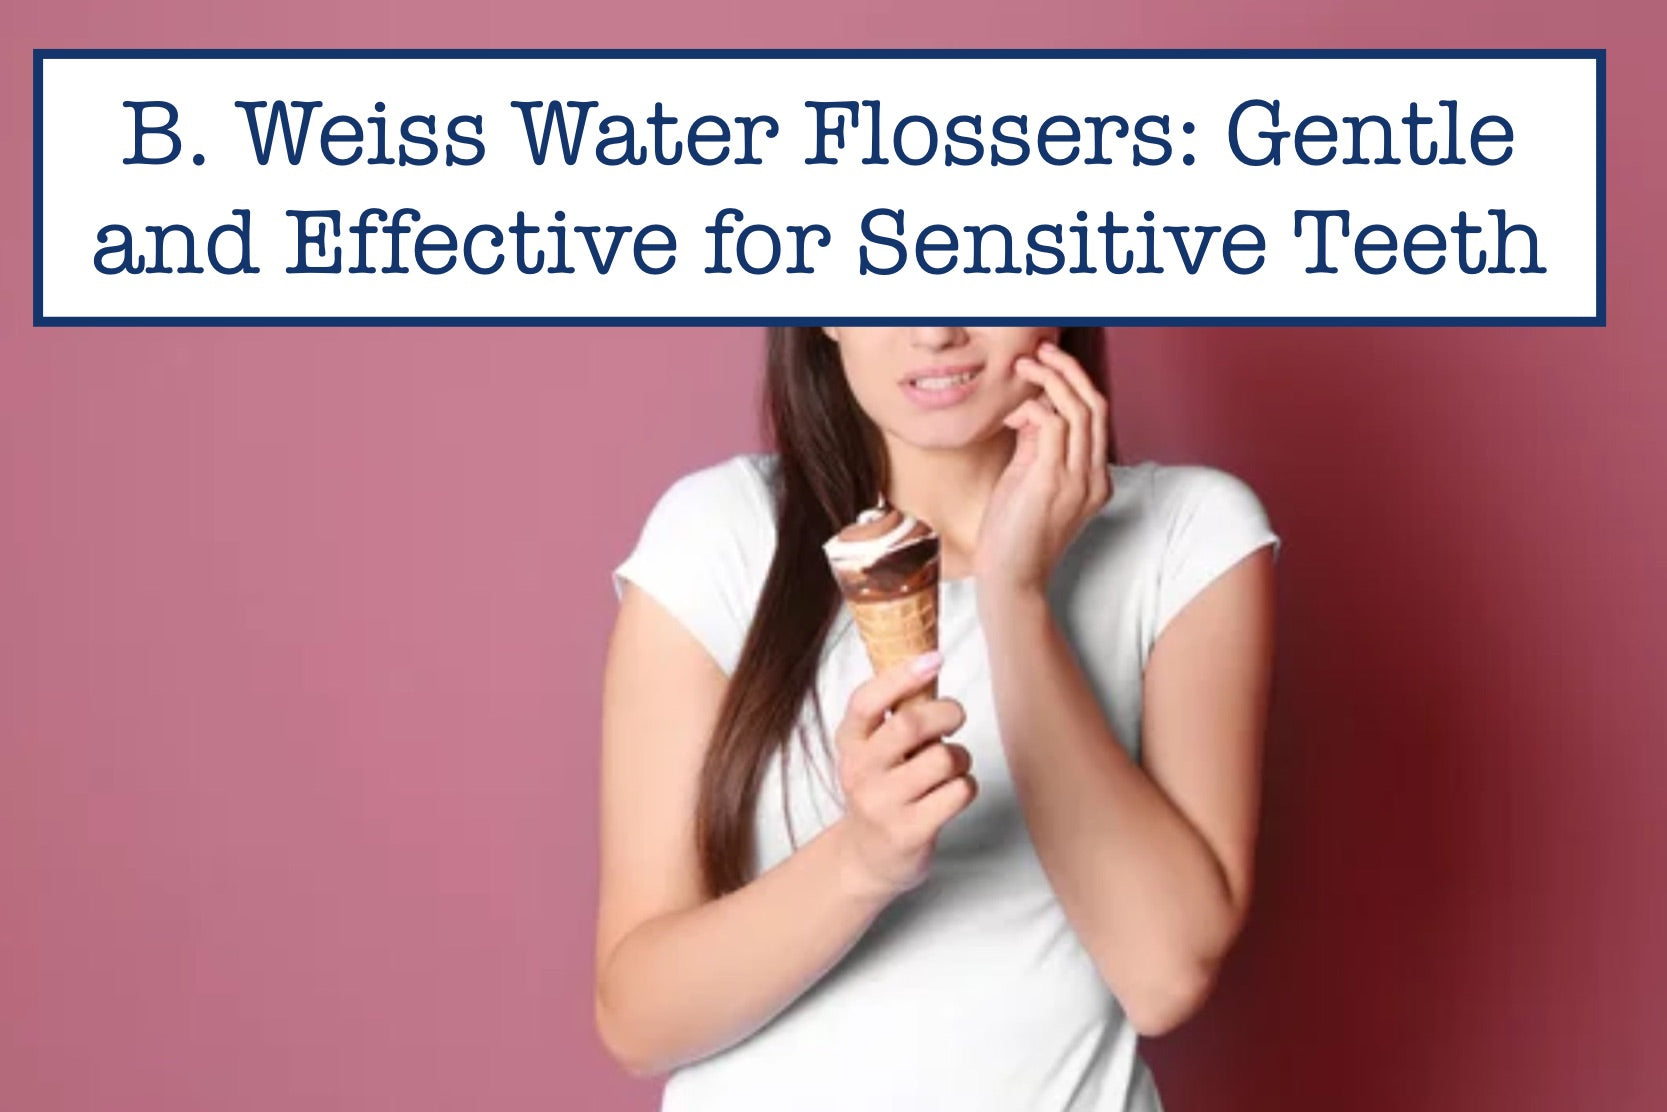 B. Weiss Water Flossers: Gentle and Effective for Sensitive Teeth